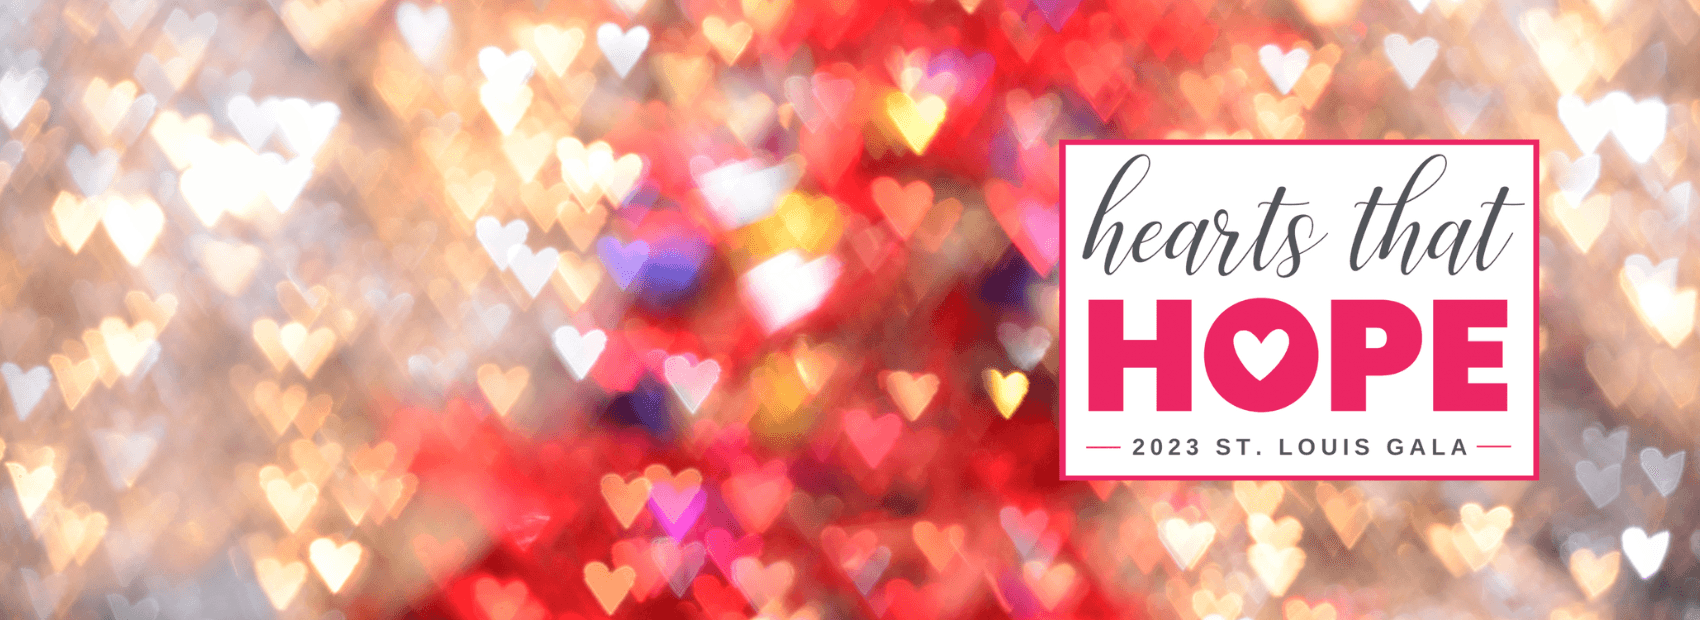 The 2nd annual Hearts that Hope Gala is Feb. 24th